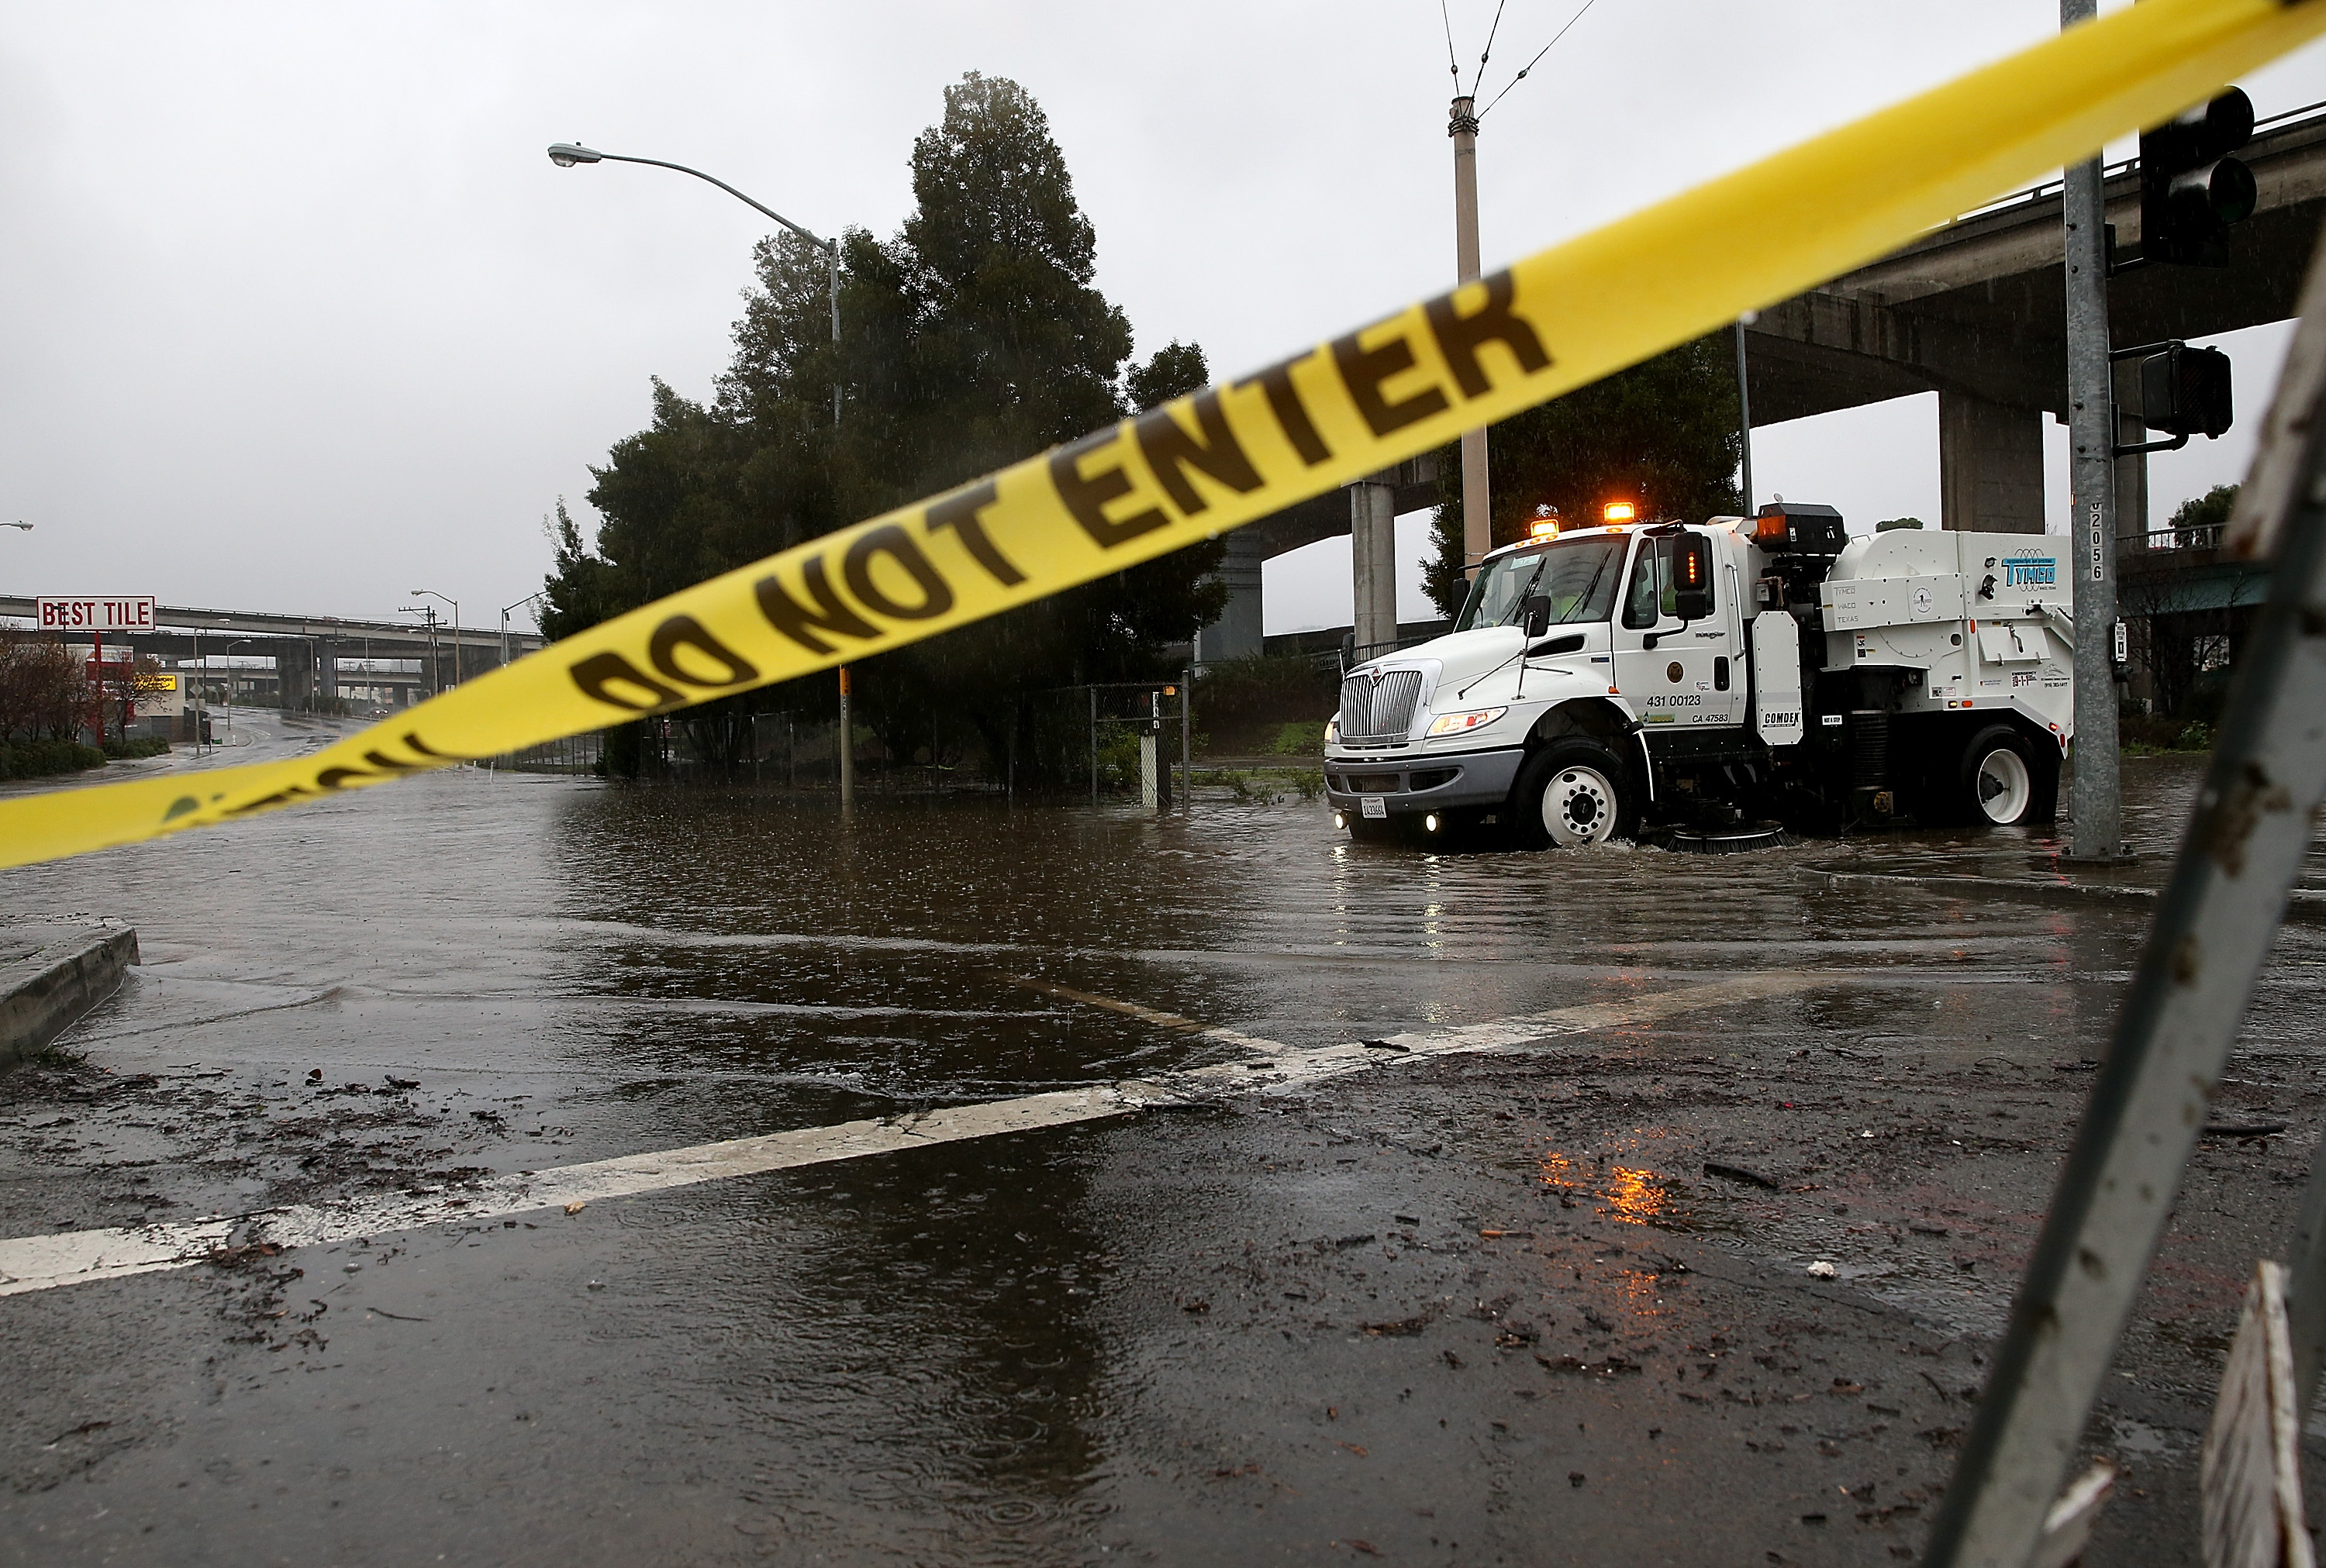 A San Francisco Department of Public Works street cleaner attempts to clear a drain that is causing an intersection to flood.